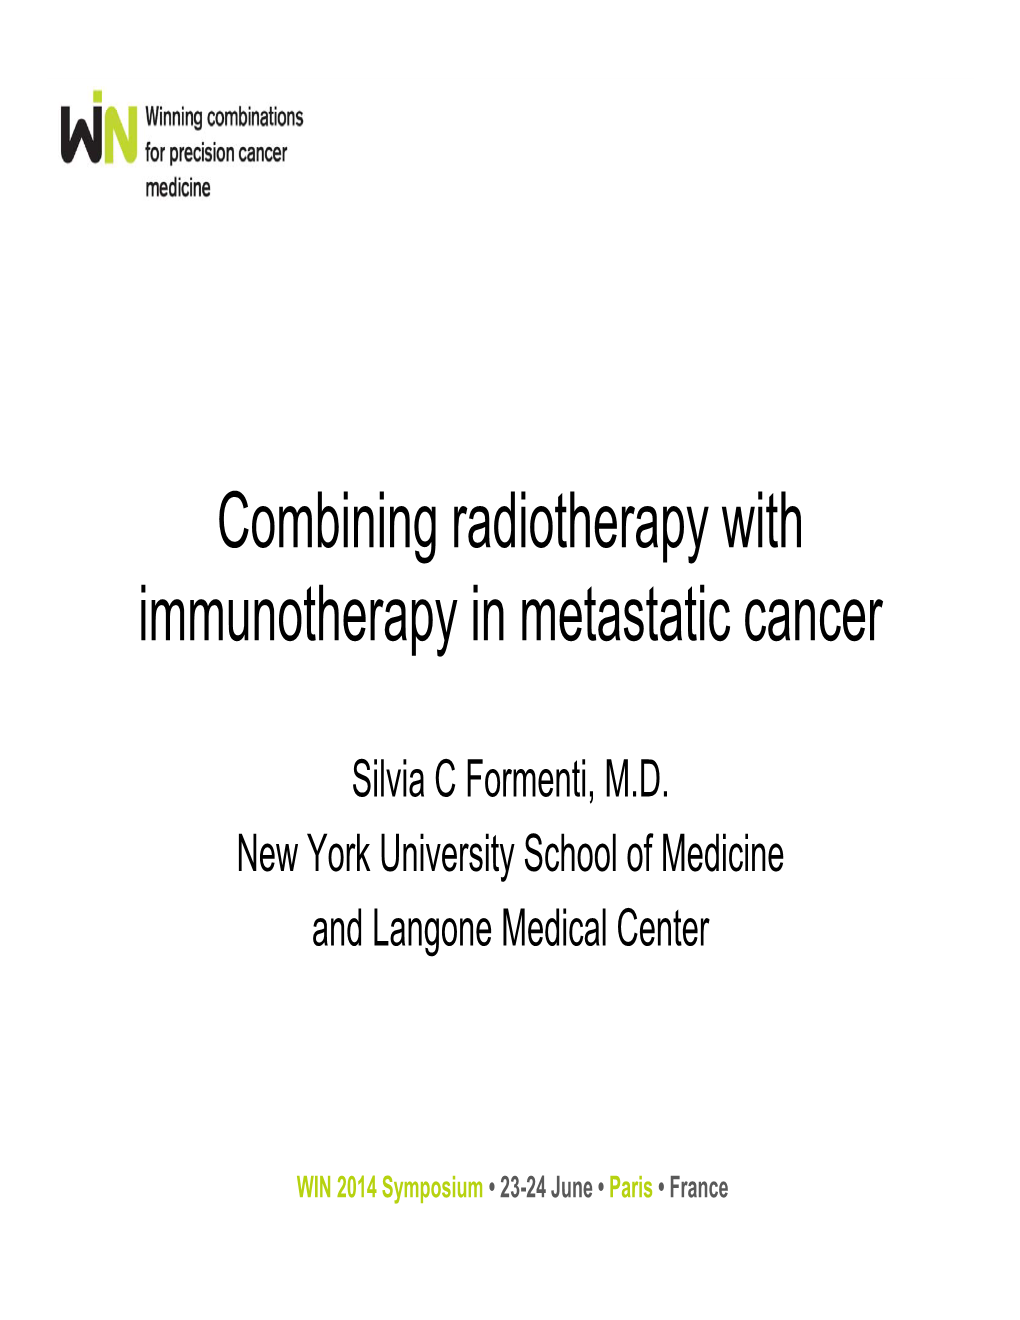 Combining Radiotherapy with Immunotherapy in Metastatic Cancer